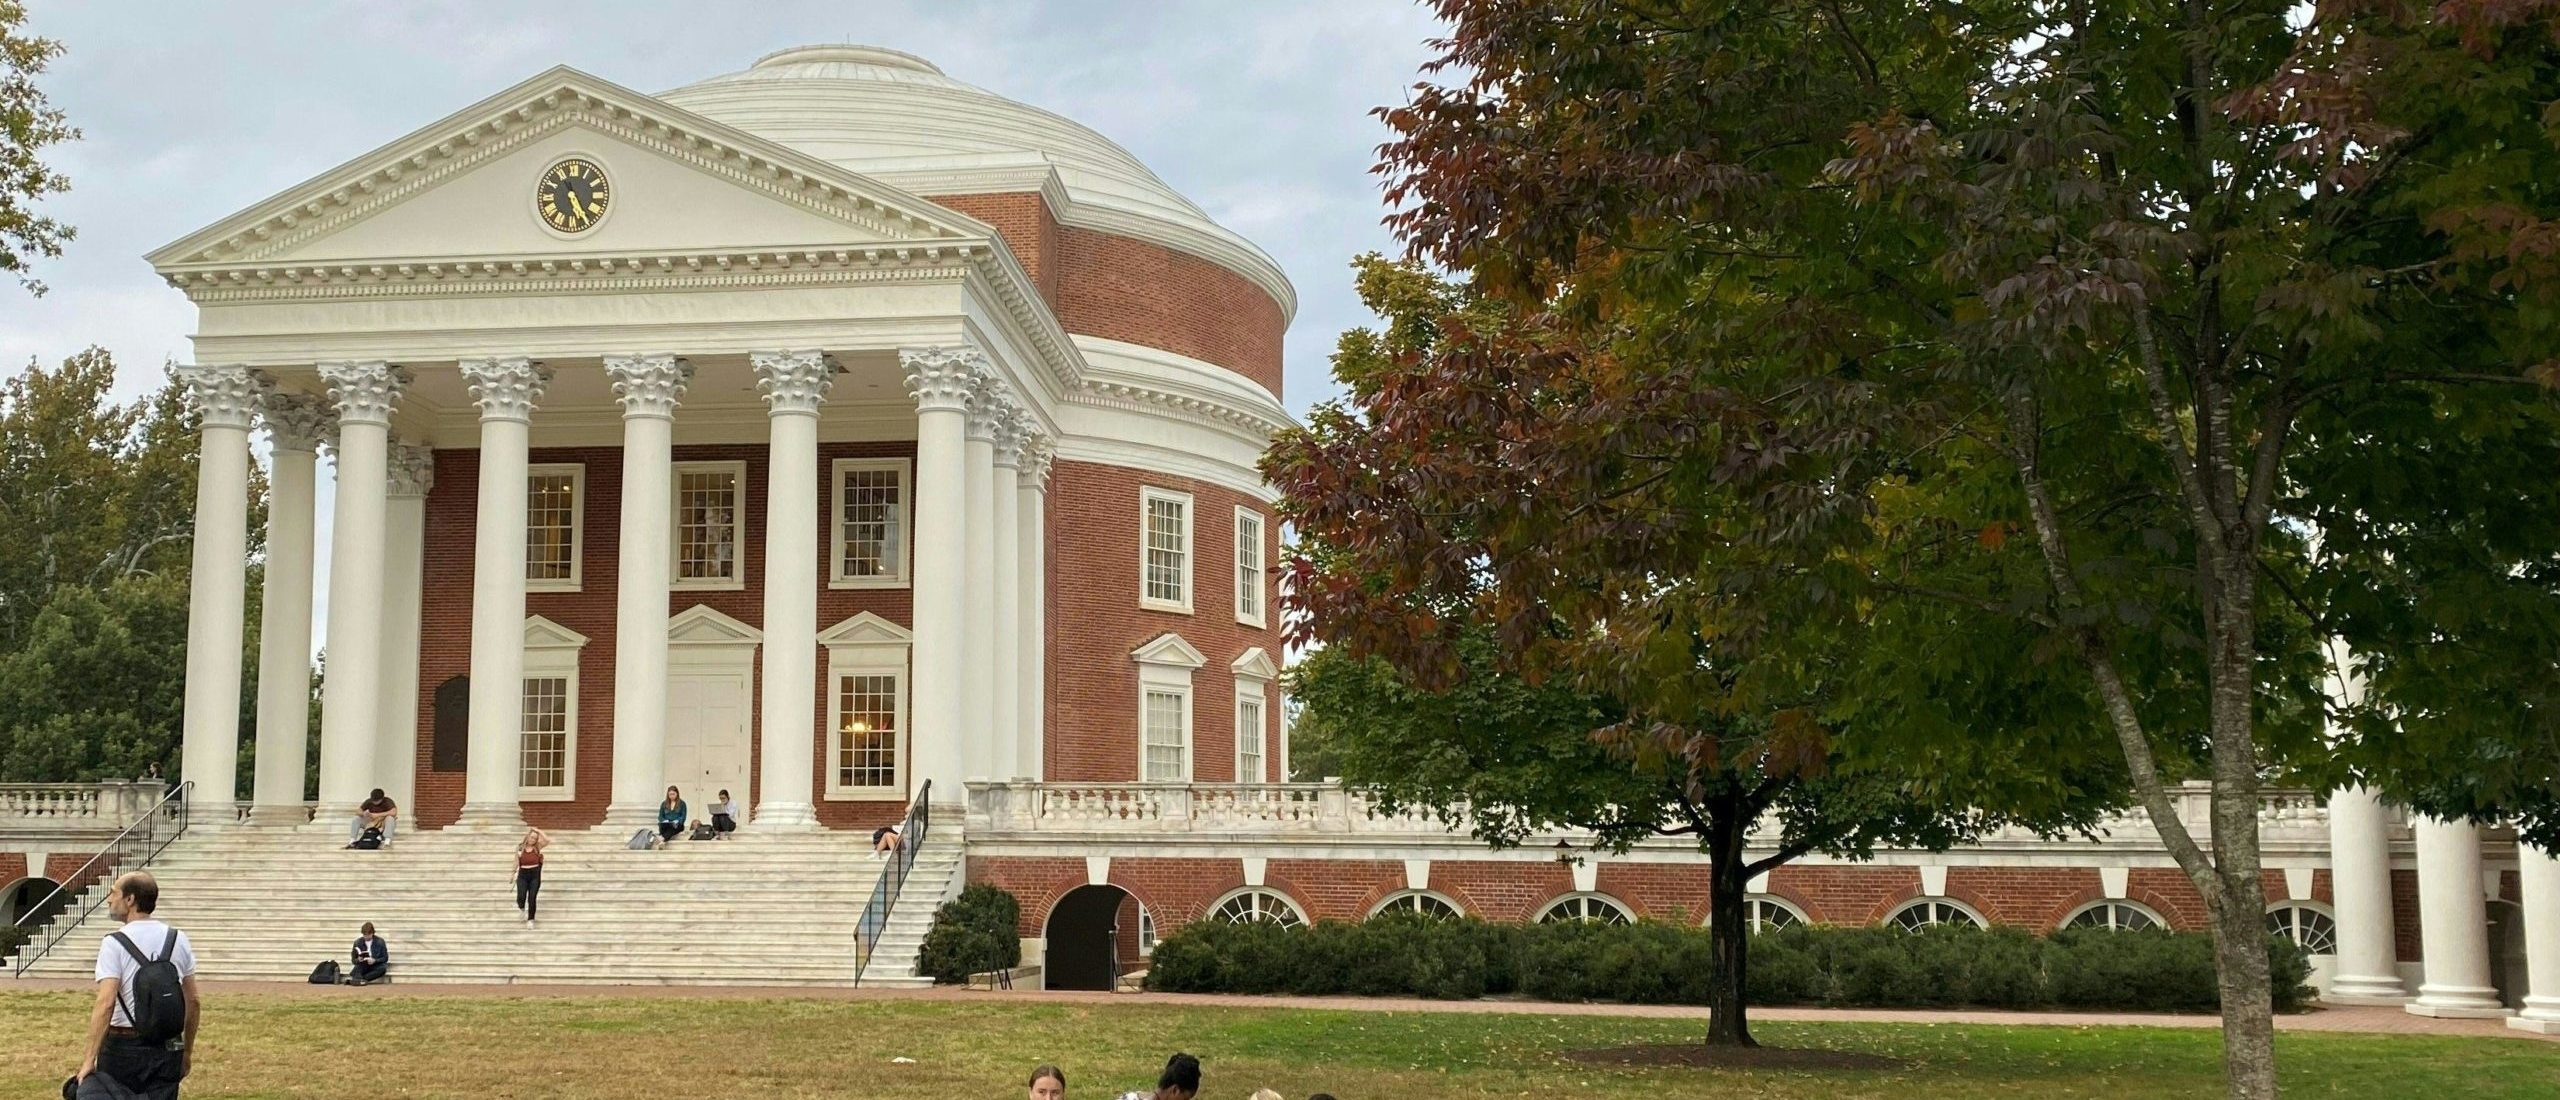 Rolling Stone Chief Resigns. His Temp Replacement? The Editor Responsible For Infamous Rape Hoax